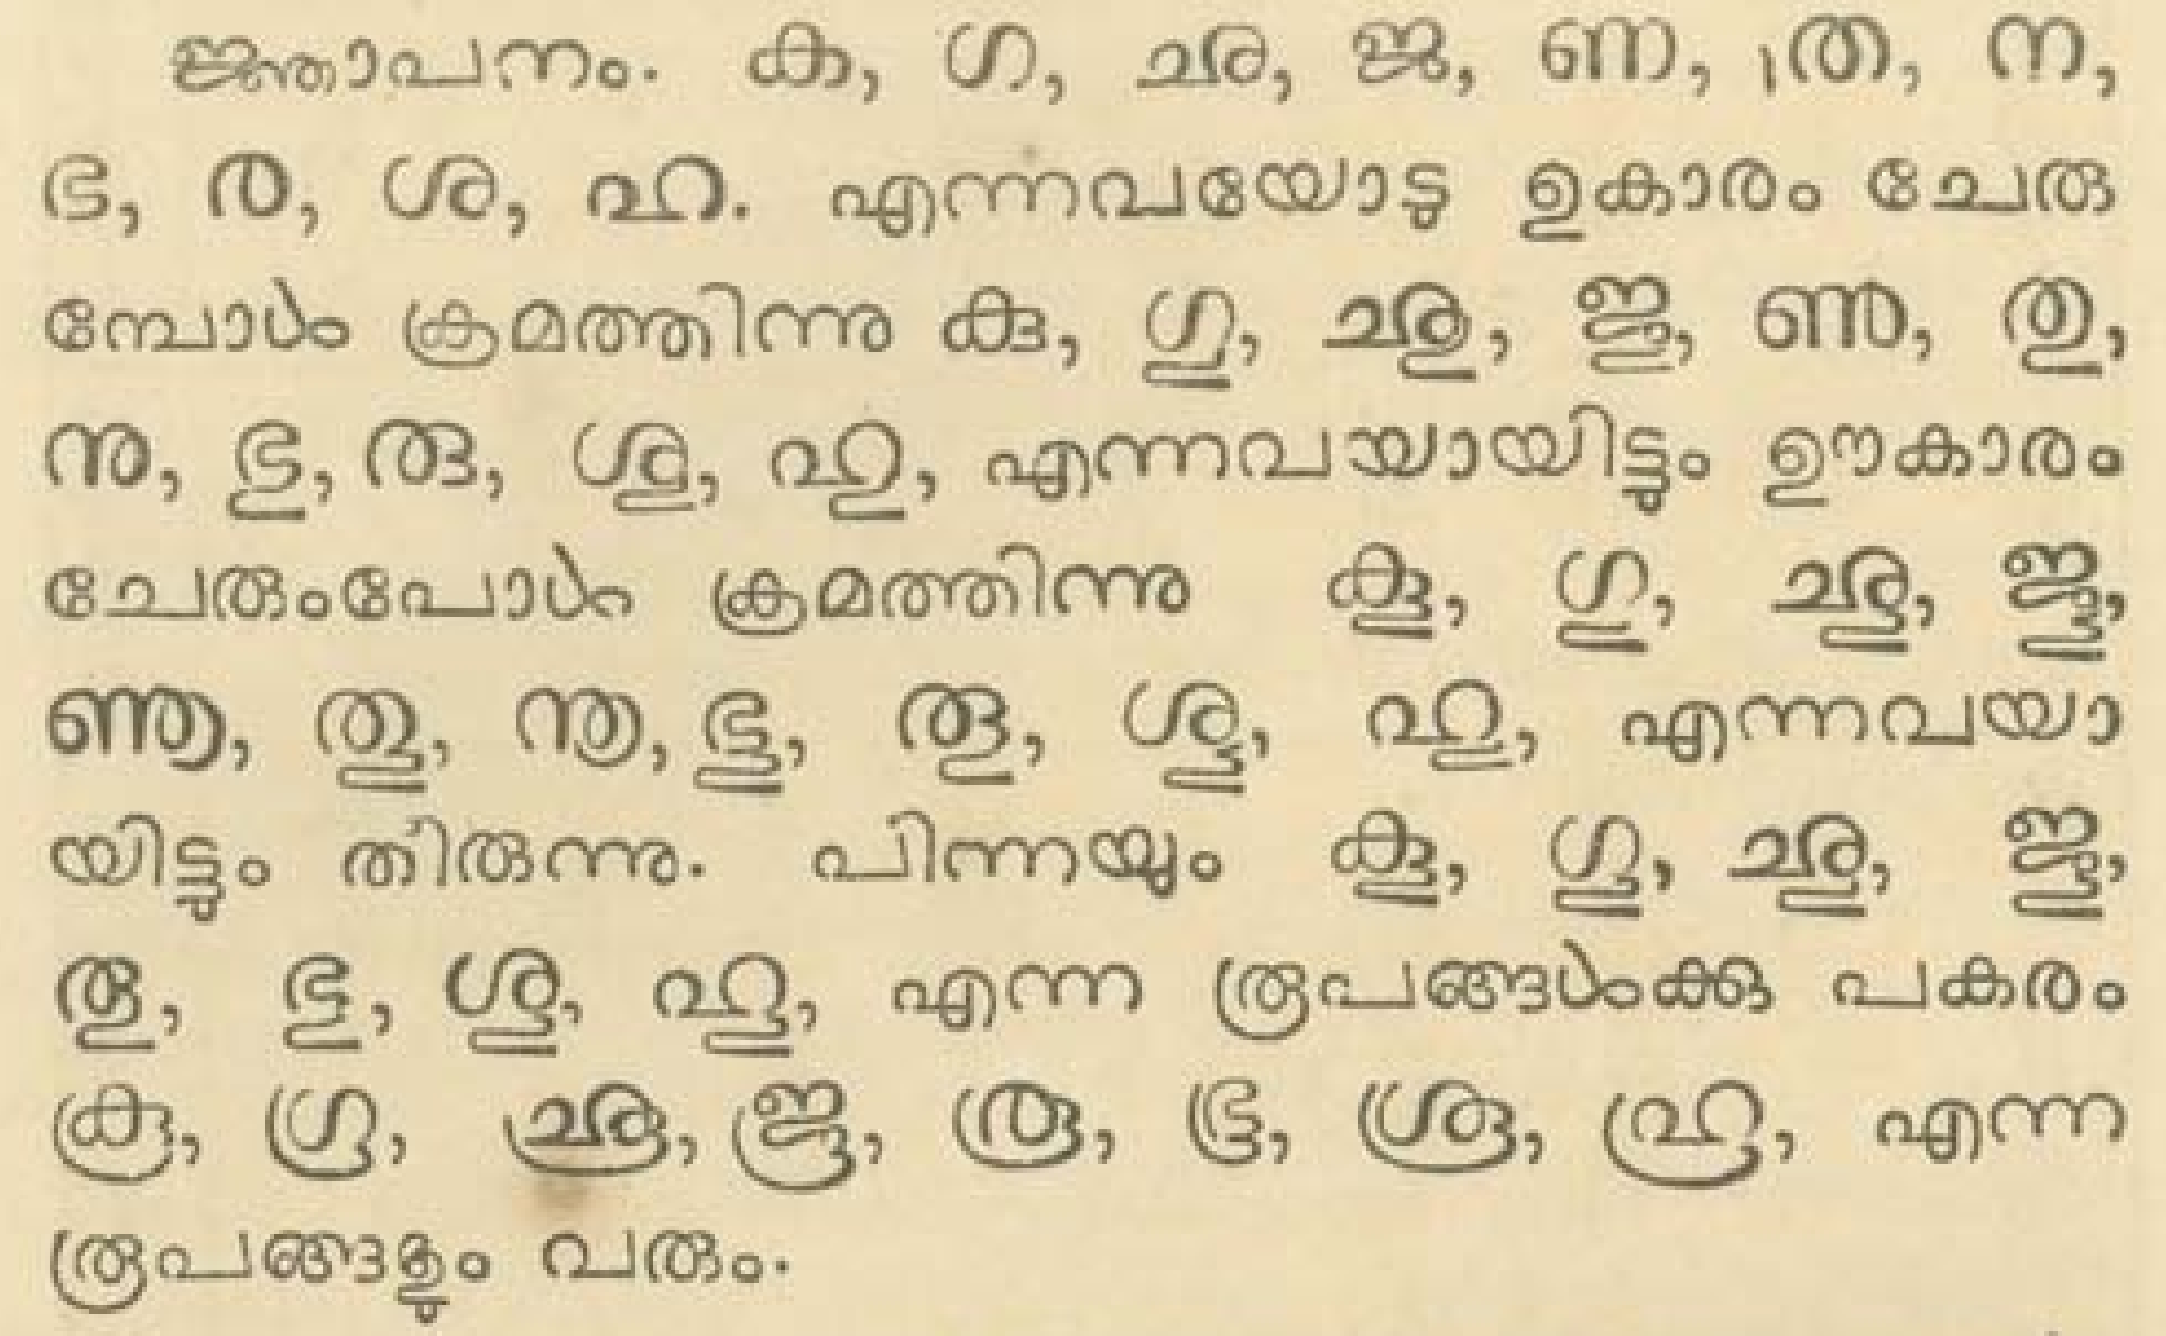 Excerpt from 'Grammar of Malayalam' describing the two types of consonant shape changes when uː vowel sign follows it.